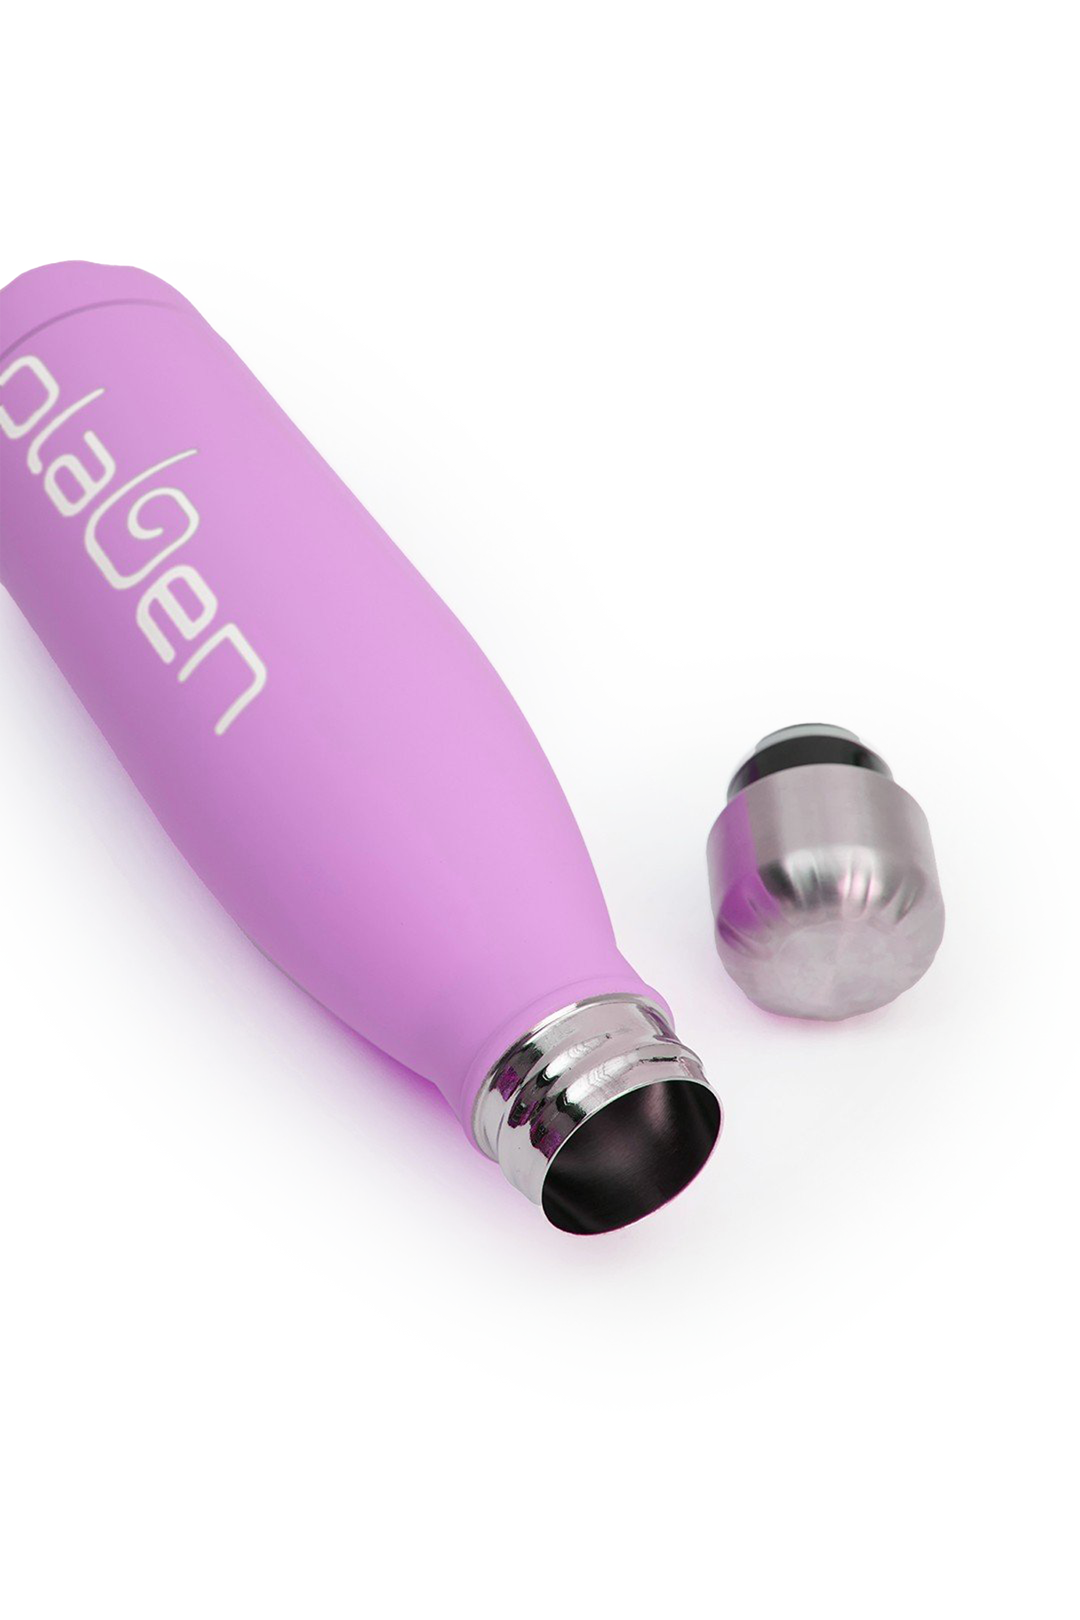 Royal Purple water bottle equipment for outdoor use